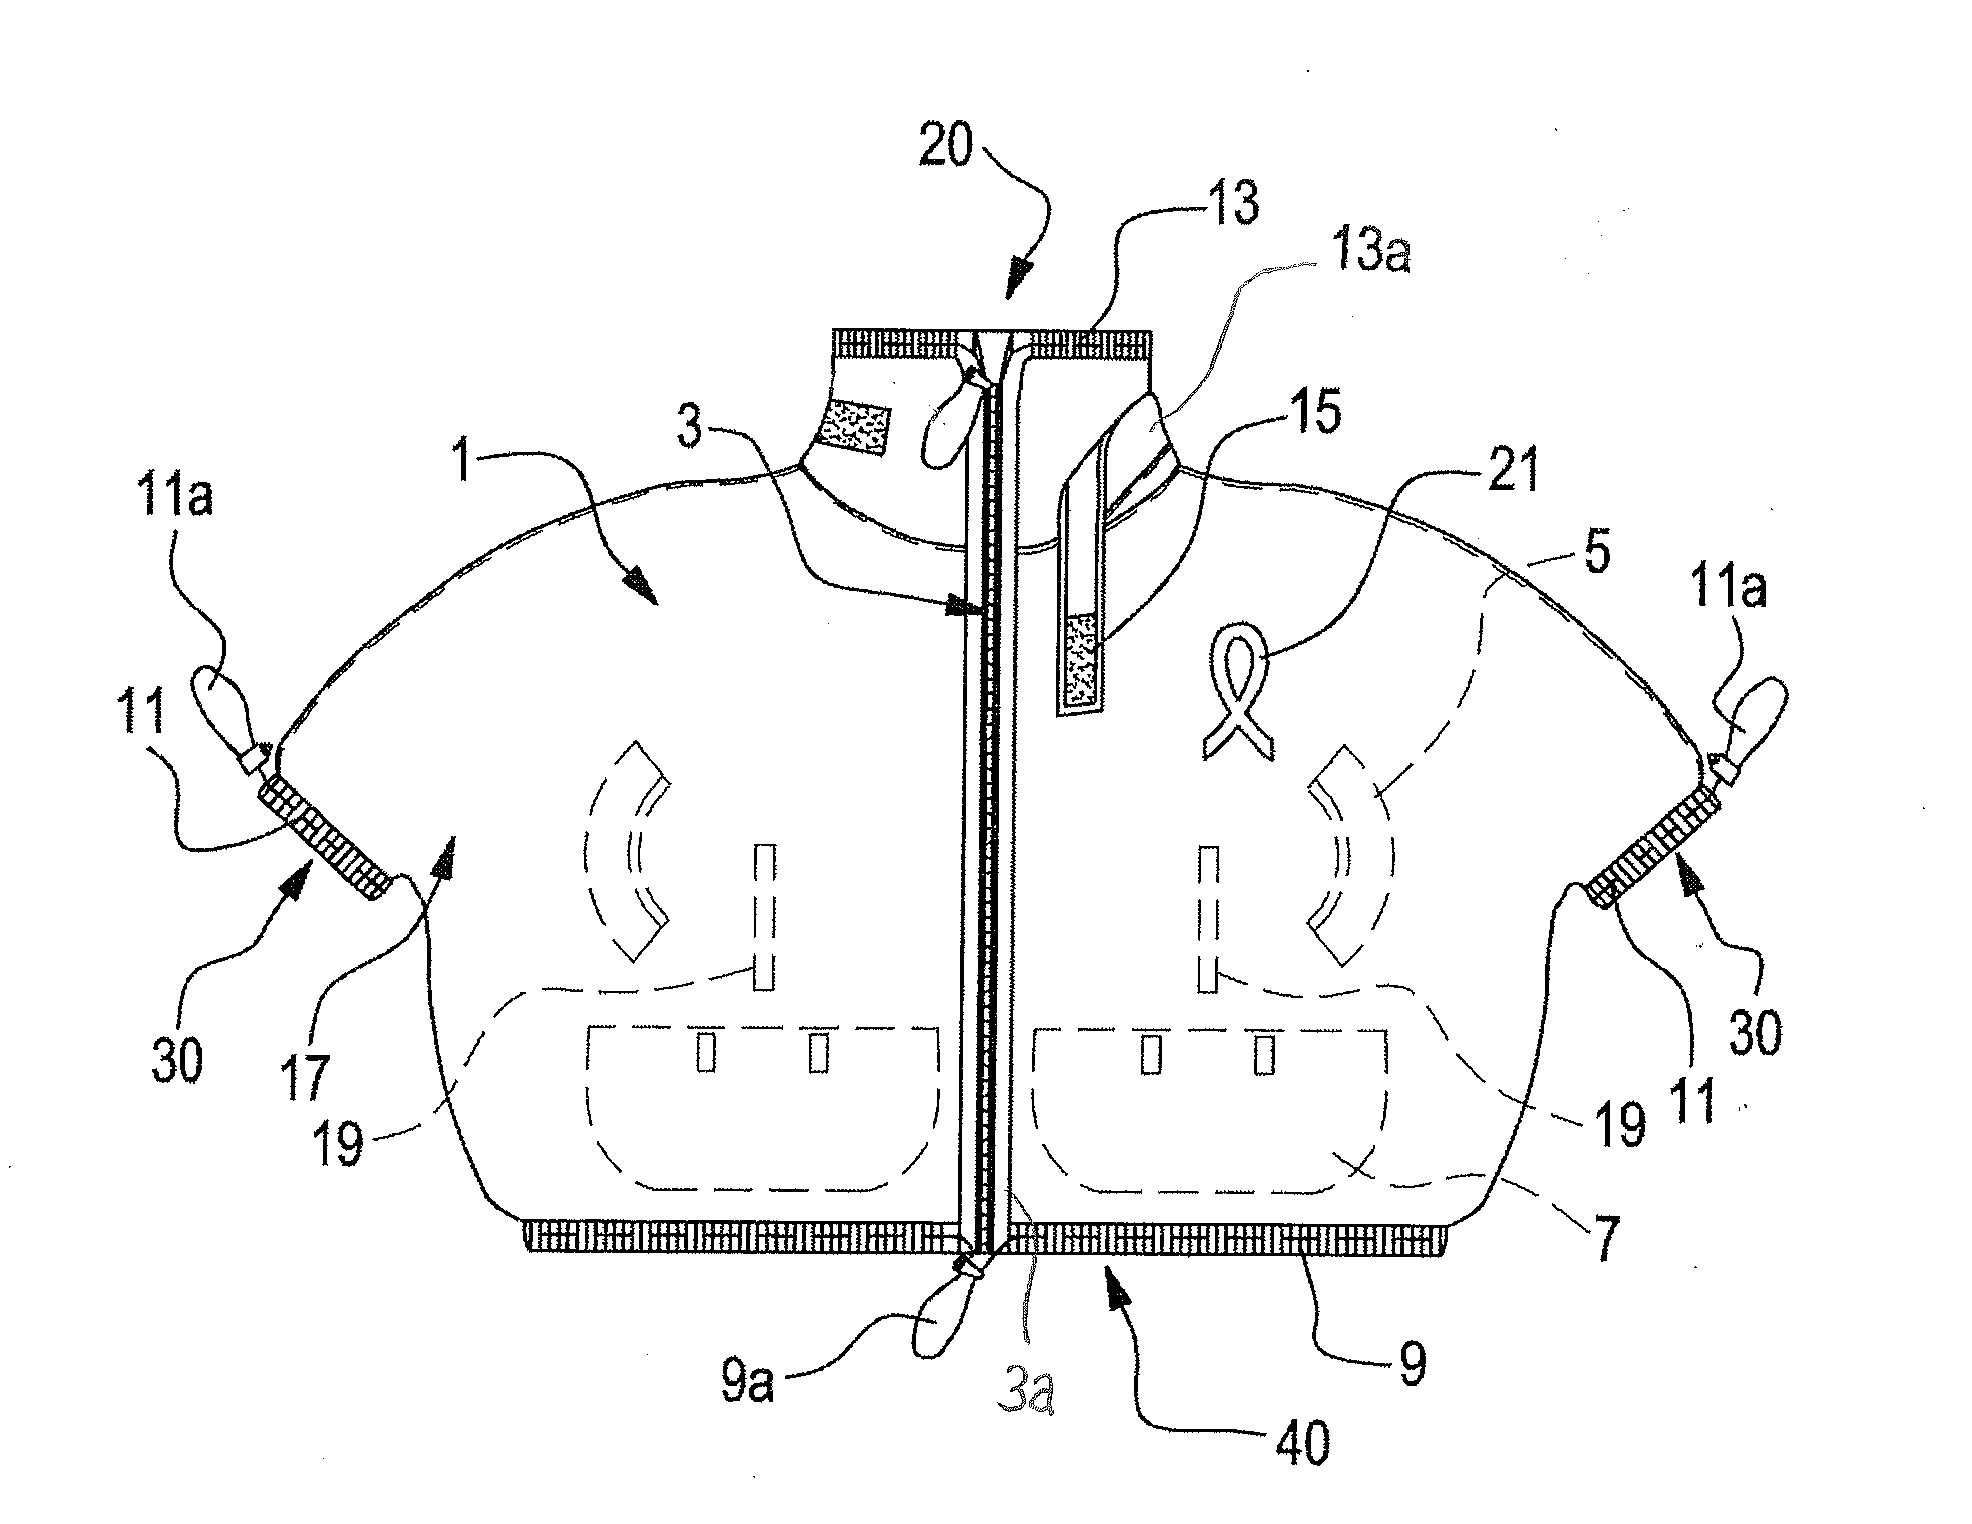 Shower shirt and method of use